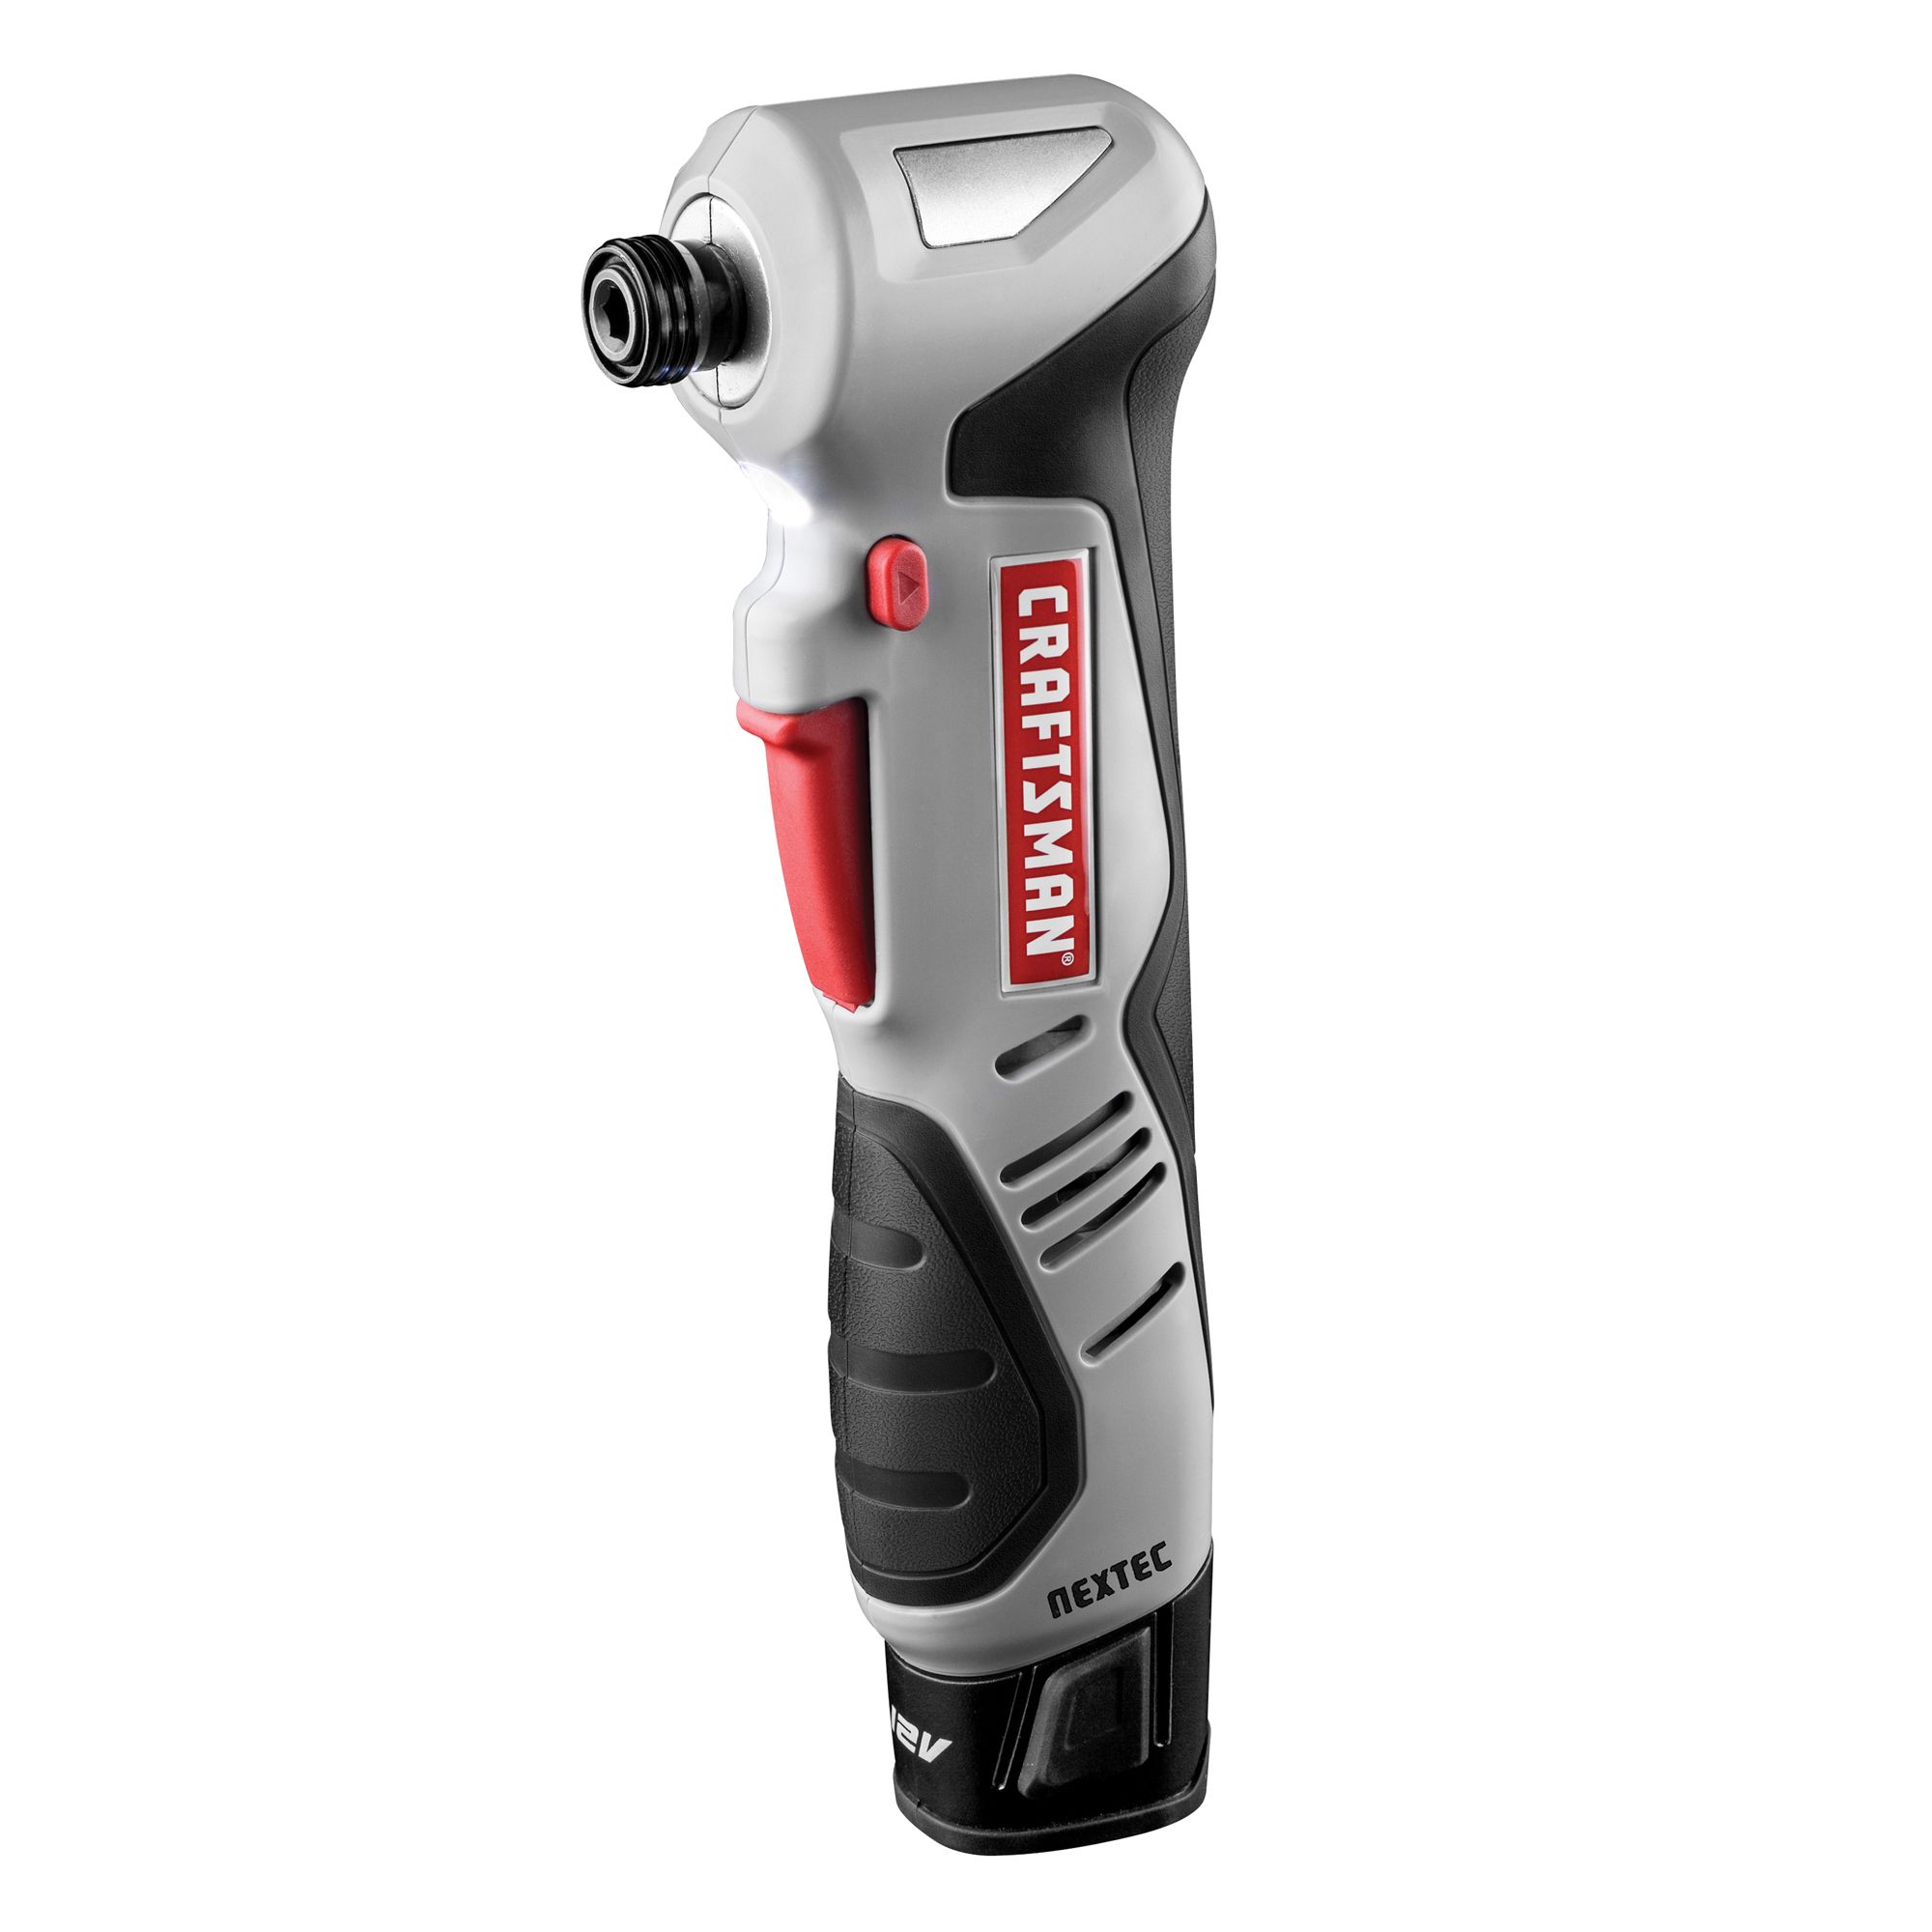 Craftsman Right Angle Impact Driver Only $29.99 (Reg. $99.99)! {HOT